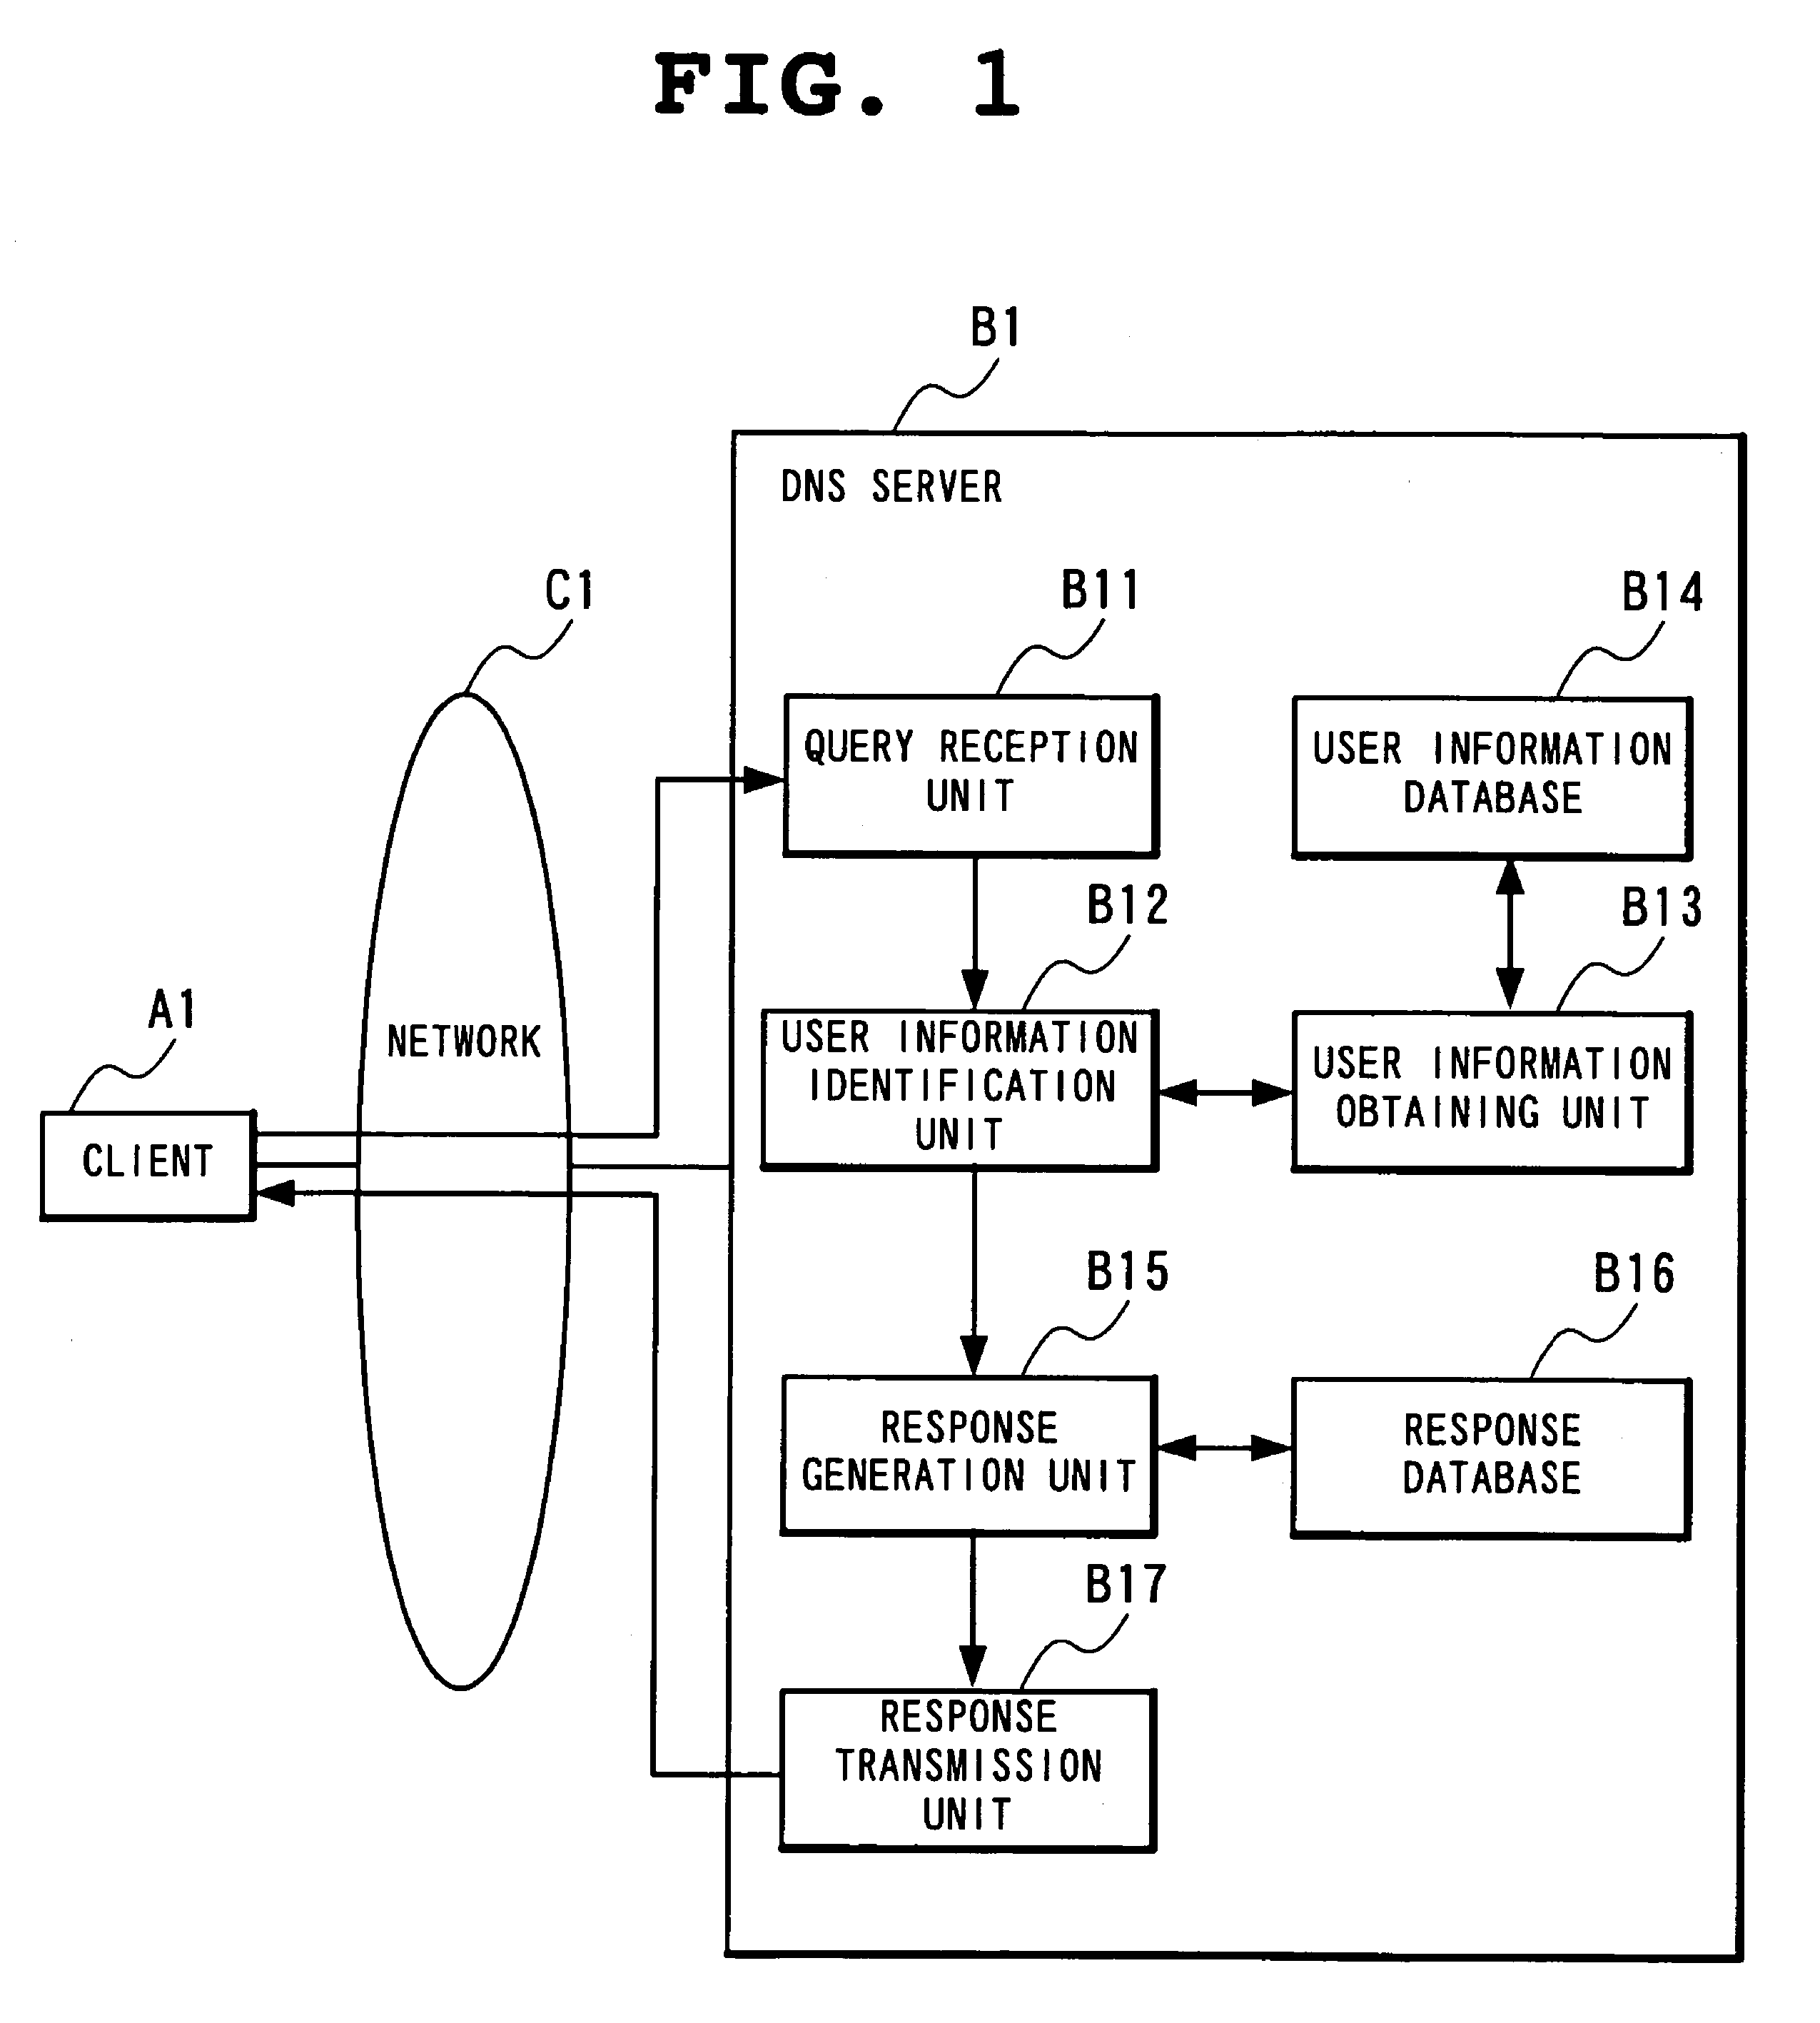 Name resolution server and packet transfer device